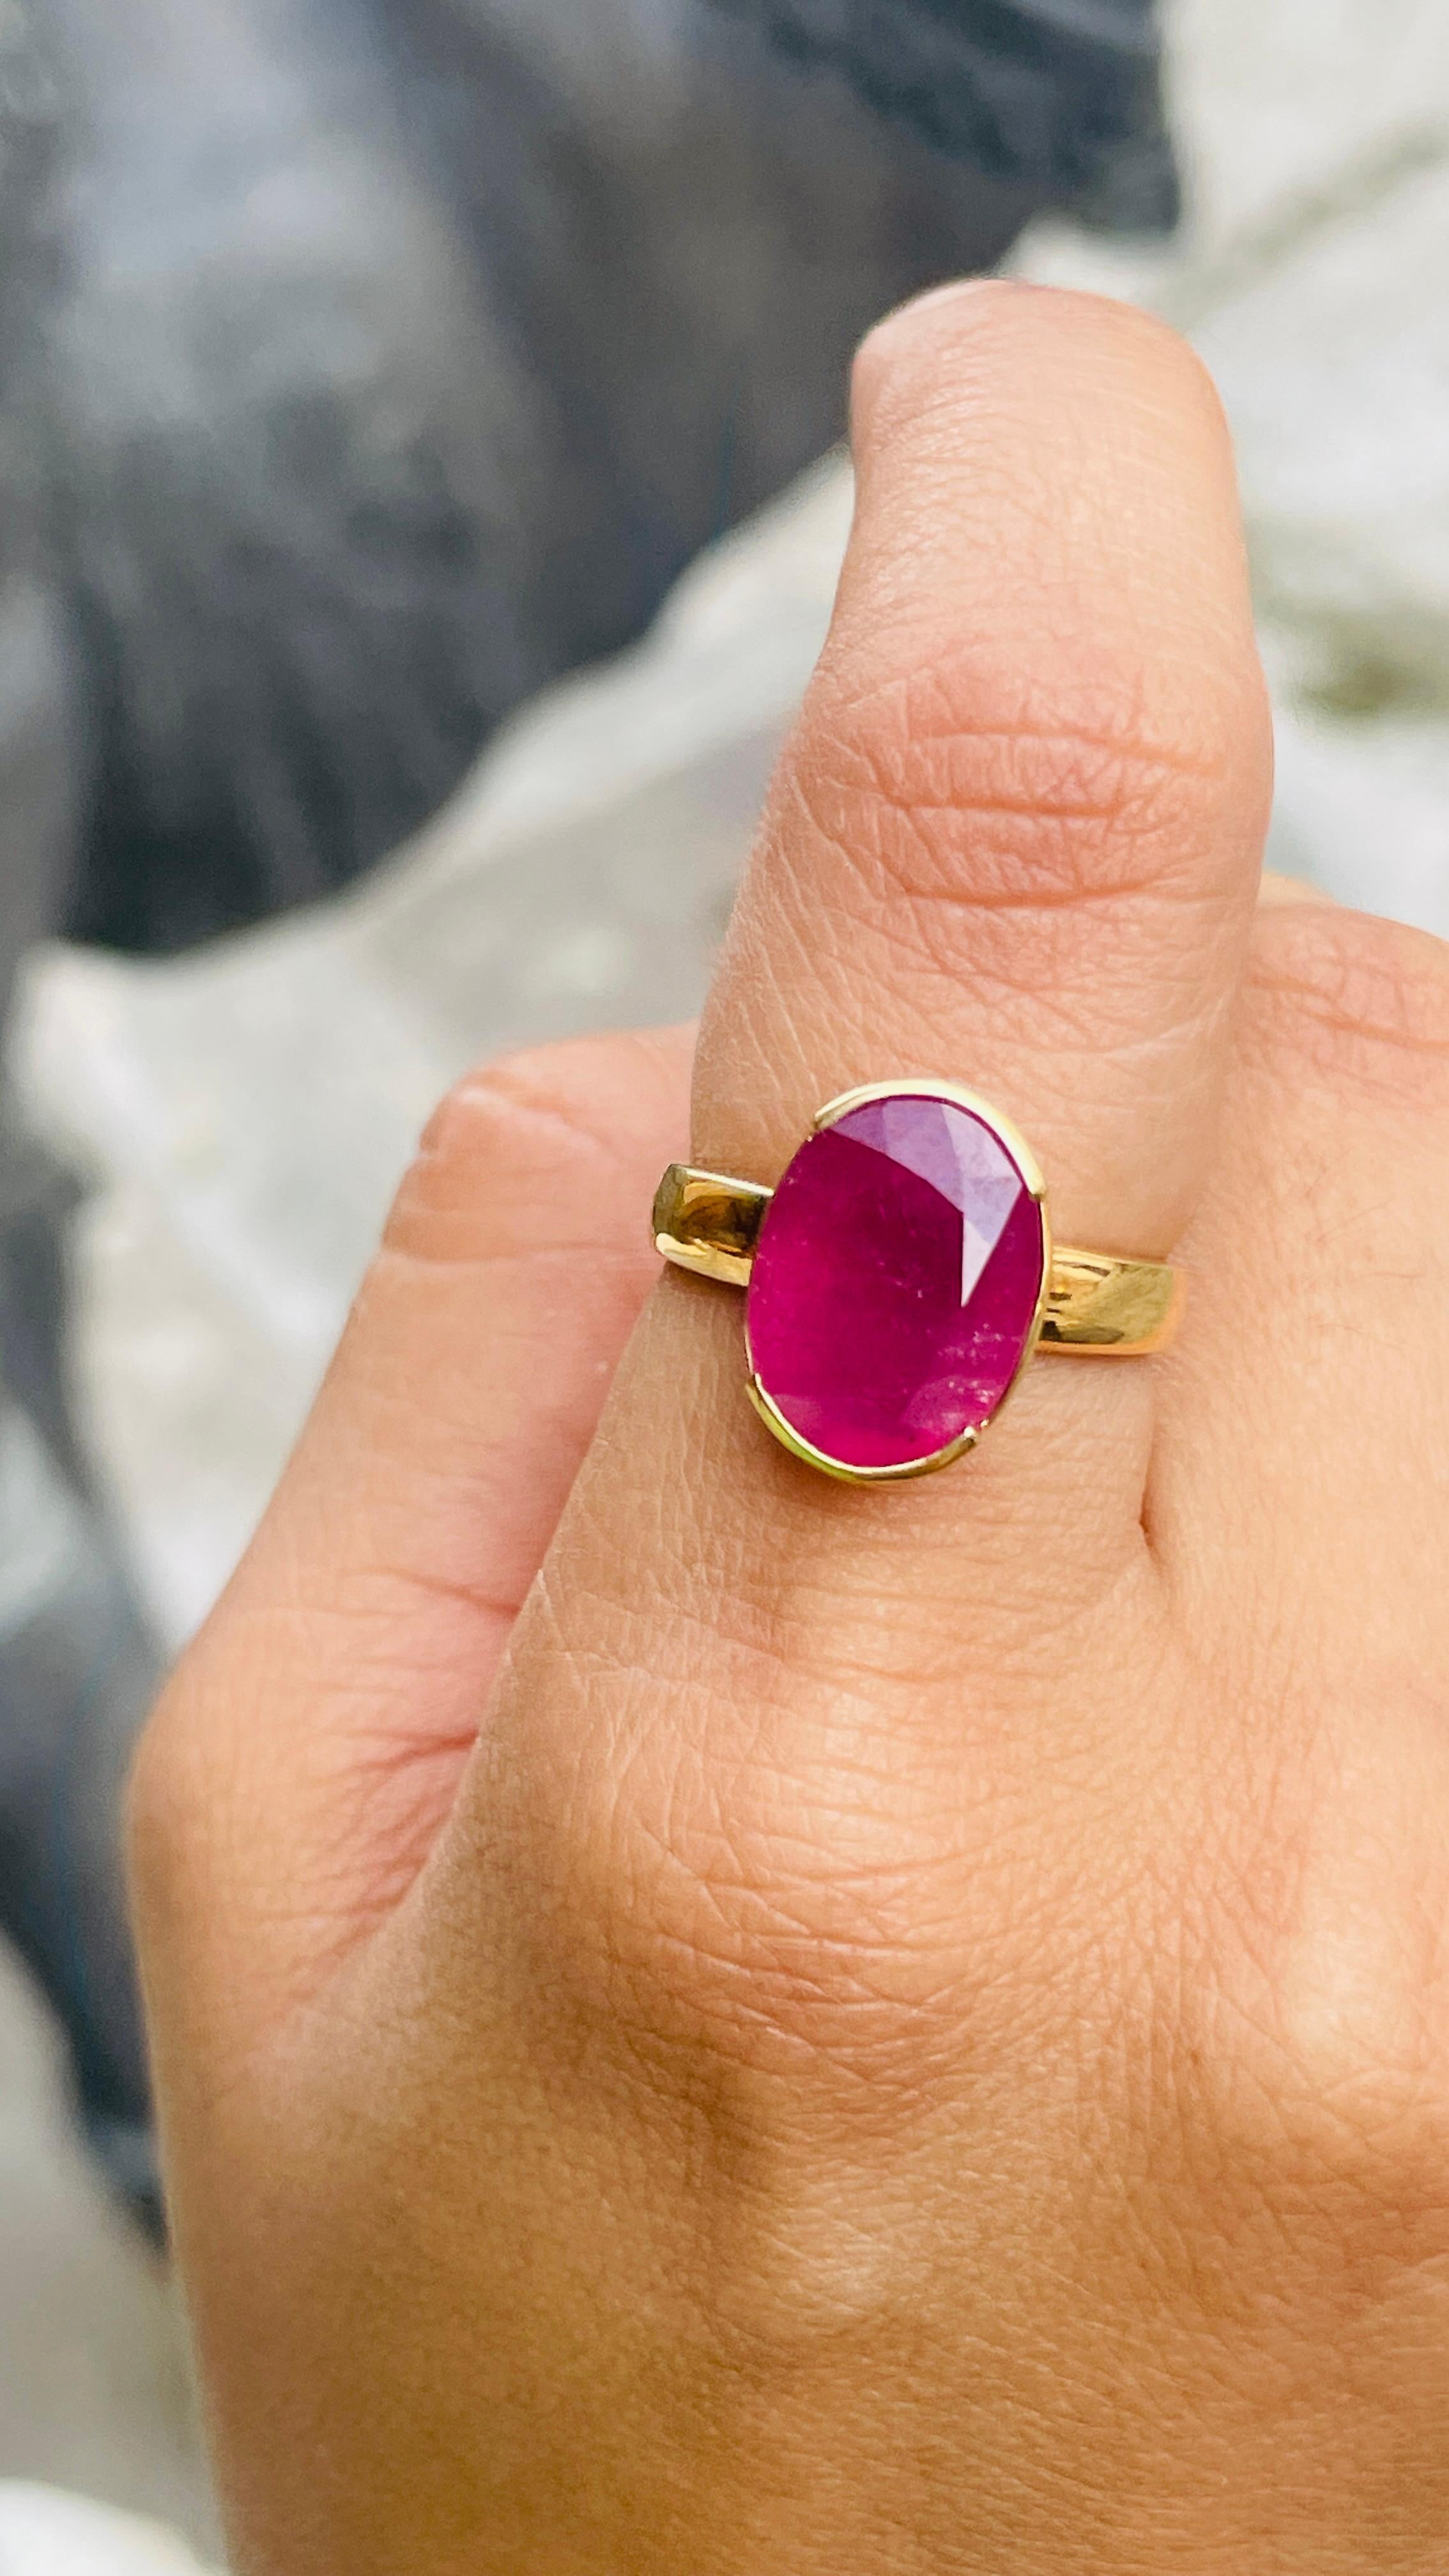 For Sale:  Contemporary Style 3.59 Carat Ruby Oval Cut Cocktail Ring in 14K Yellow Gold   8